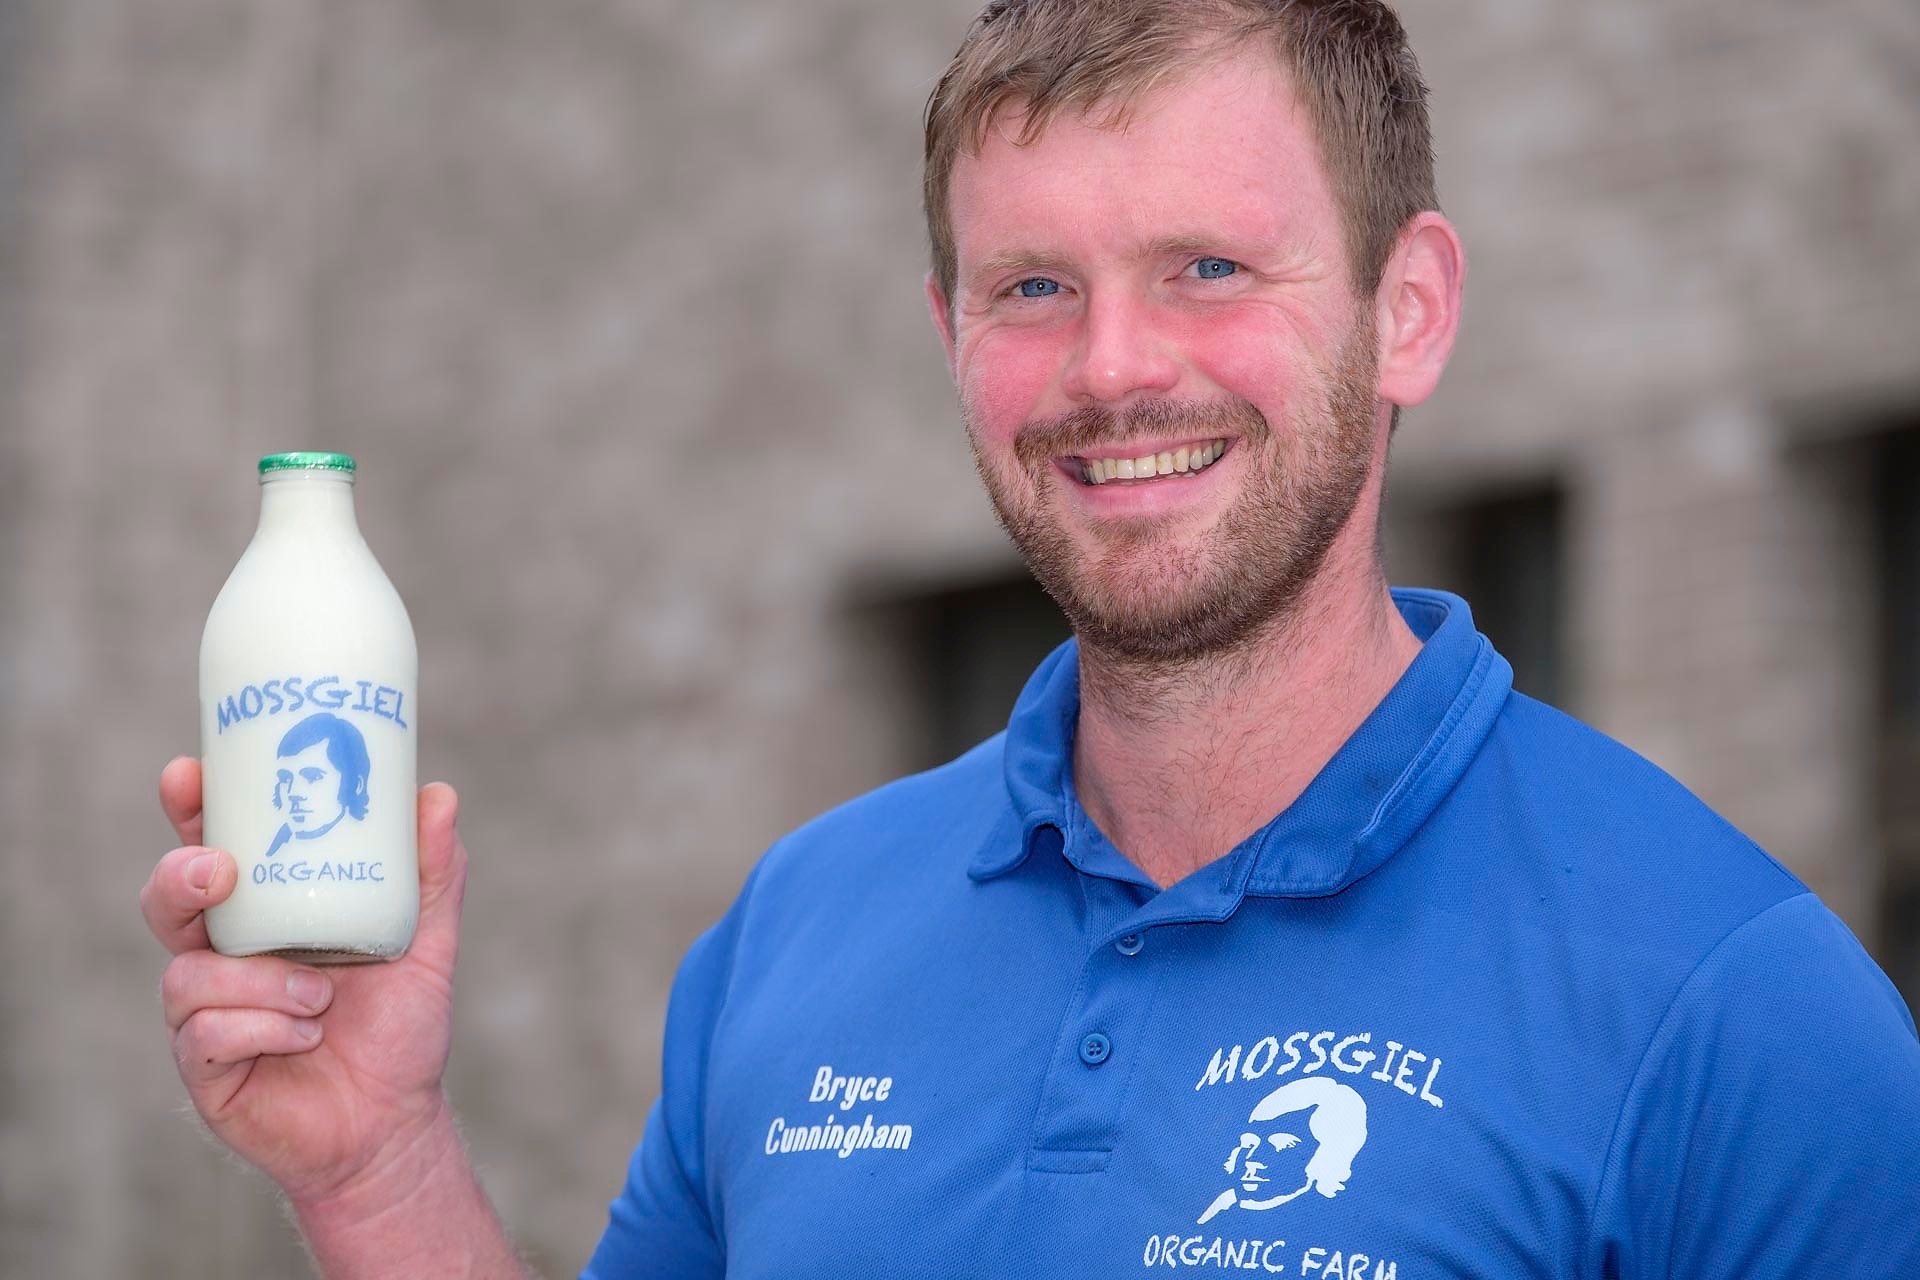 Mossgiel Organic Farm secures funding facility to help moov with the times